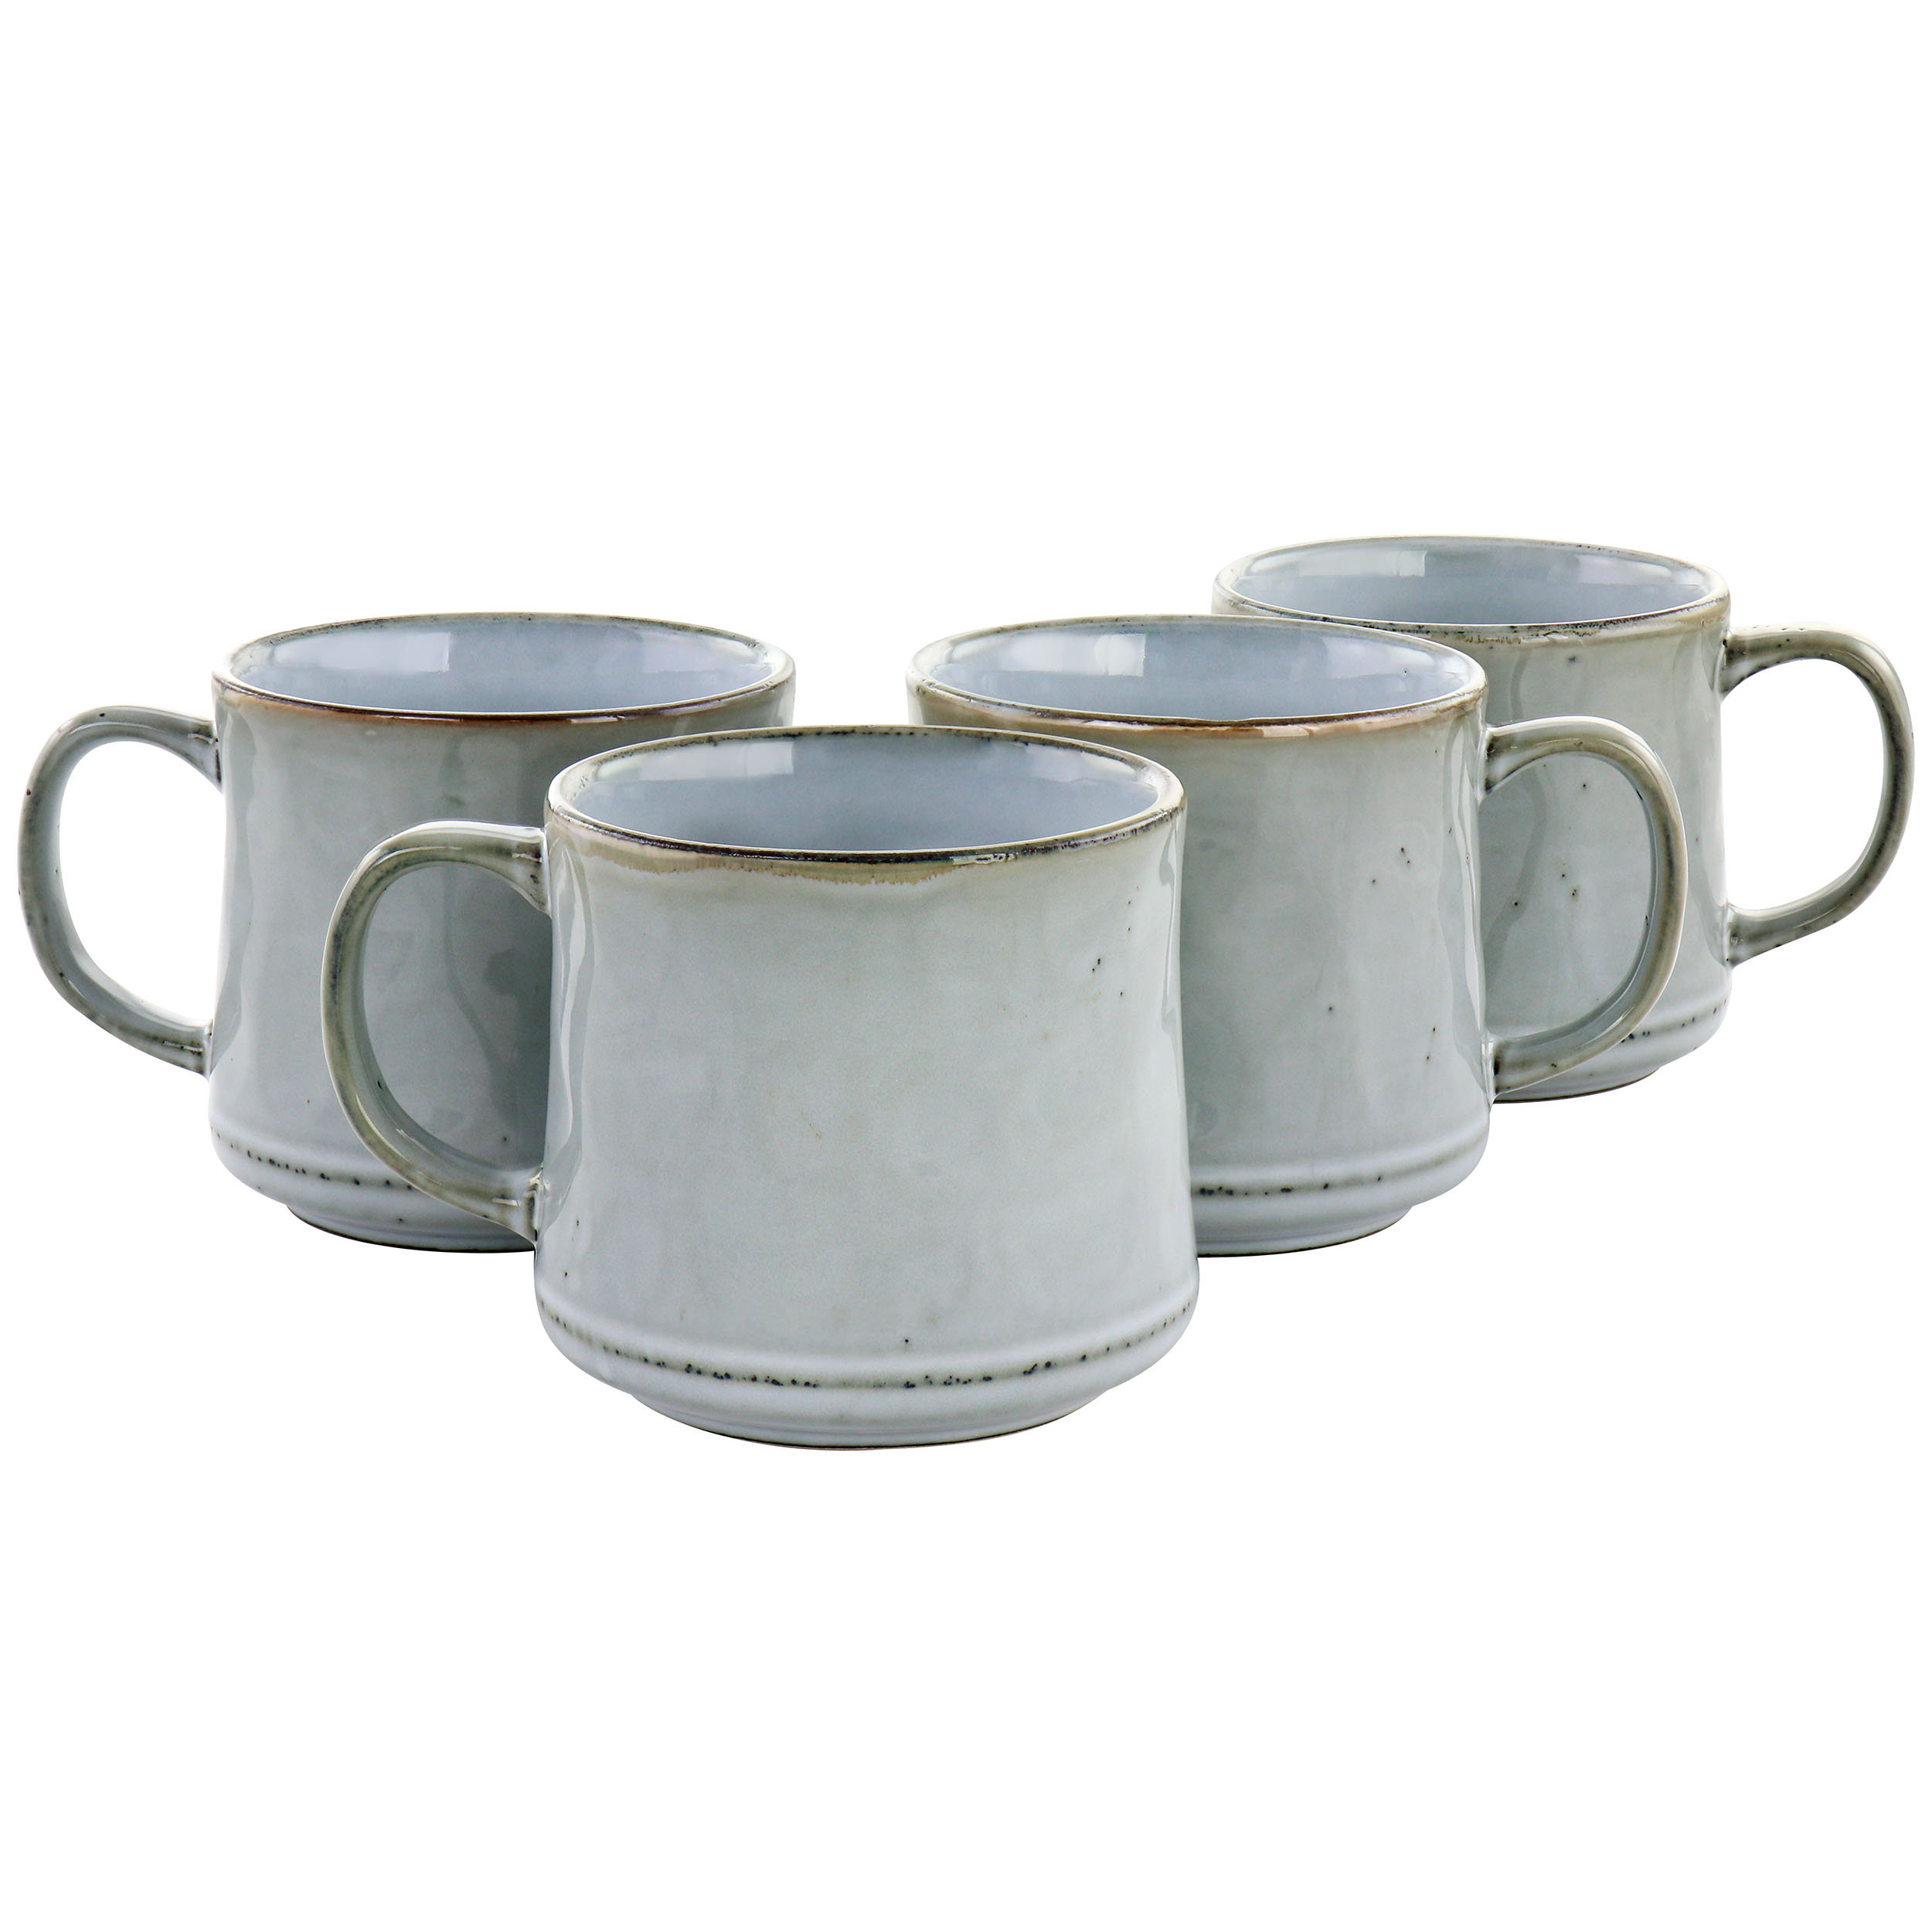 12 Piece Coffee Mugs Set of 4 - Ceramic Coffee Cups With  Saucers and Spoons in Handle, Microwave and Dishwasher Safe - Great for  Gifting: Cup & Saucer Sets